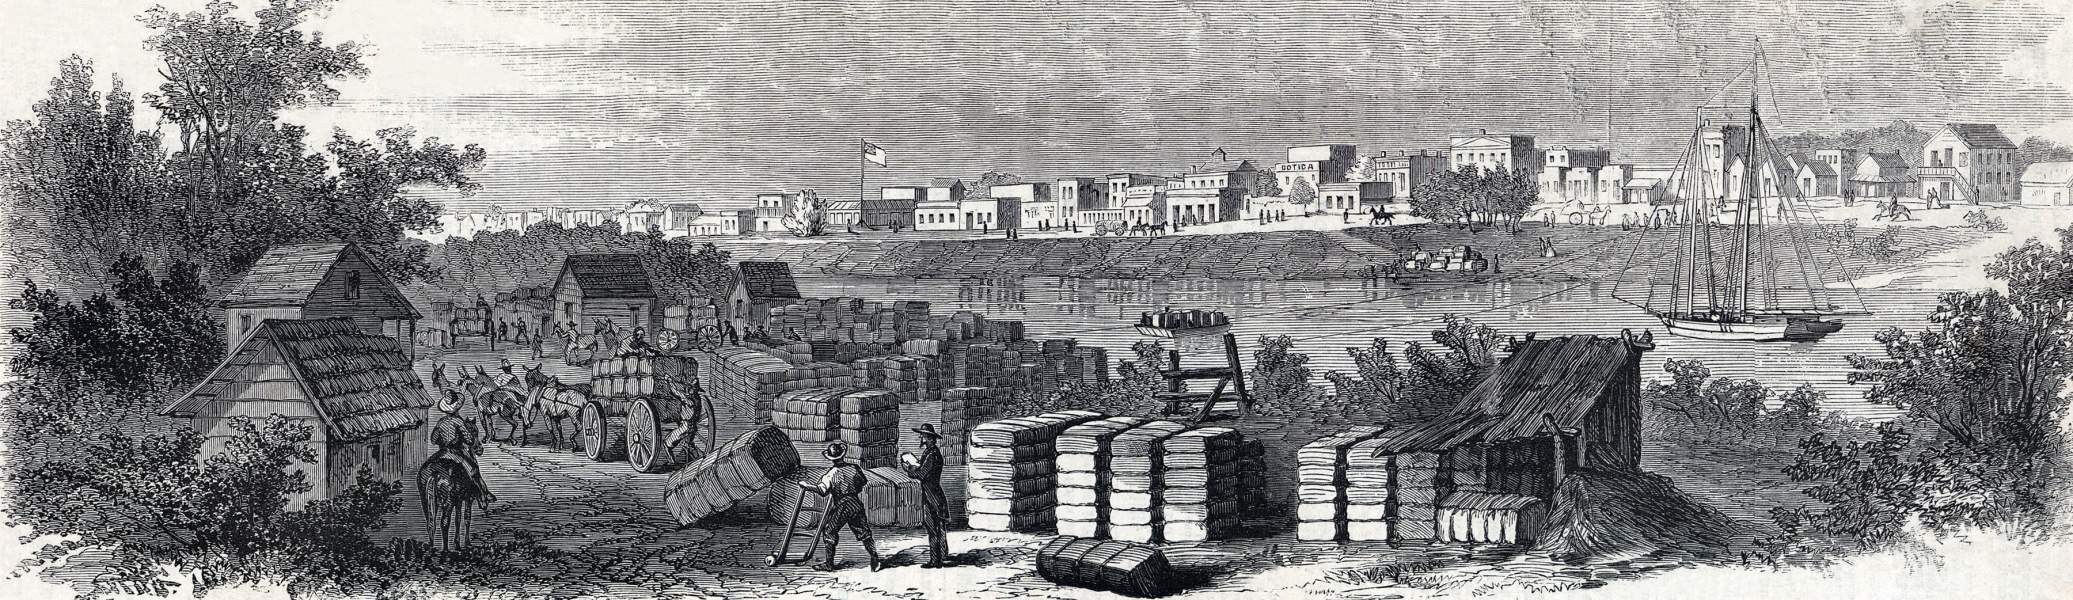 Brownsville, Texas, December 1863, artist's impression, zoomable image